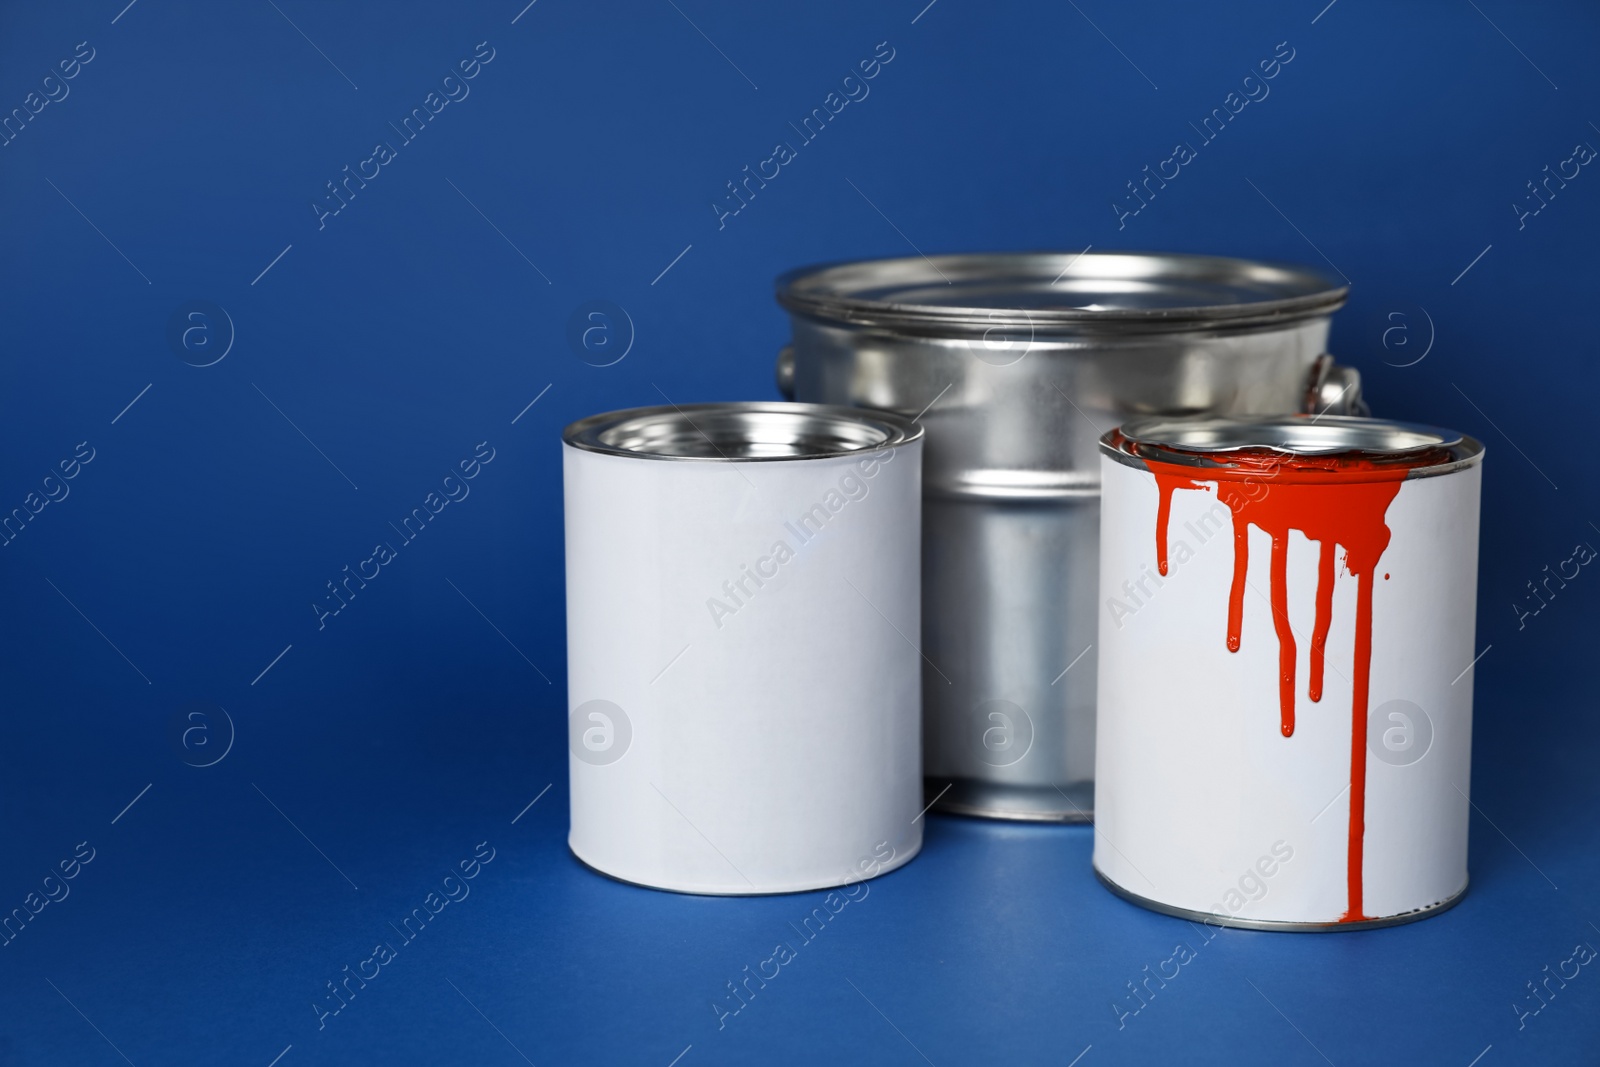 Photo of Cans of orange paint on blue background. Space for text